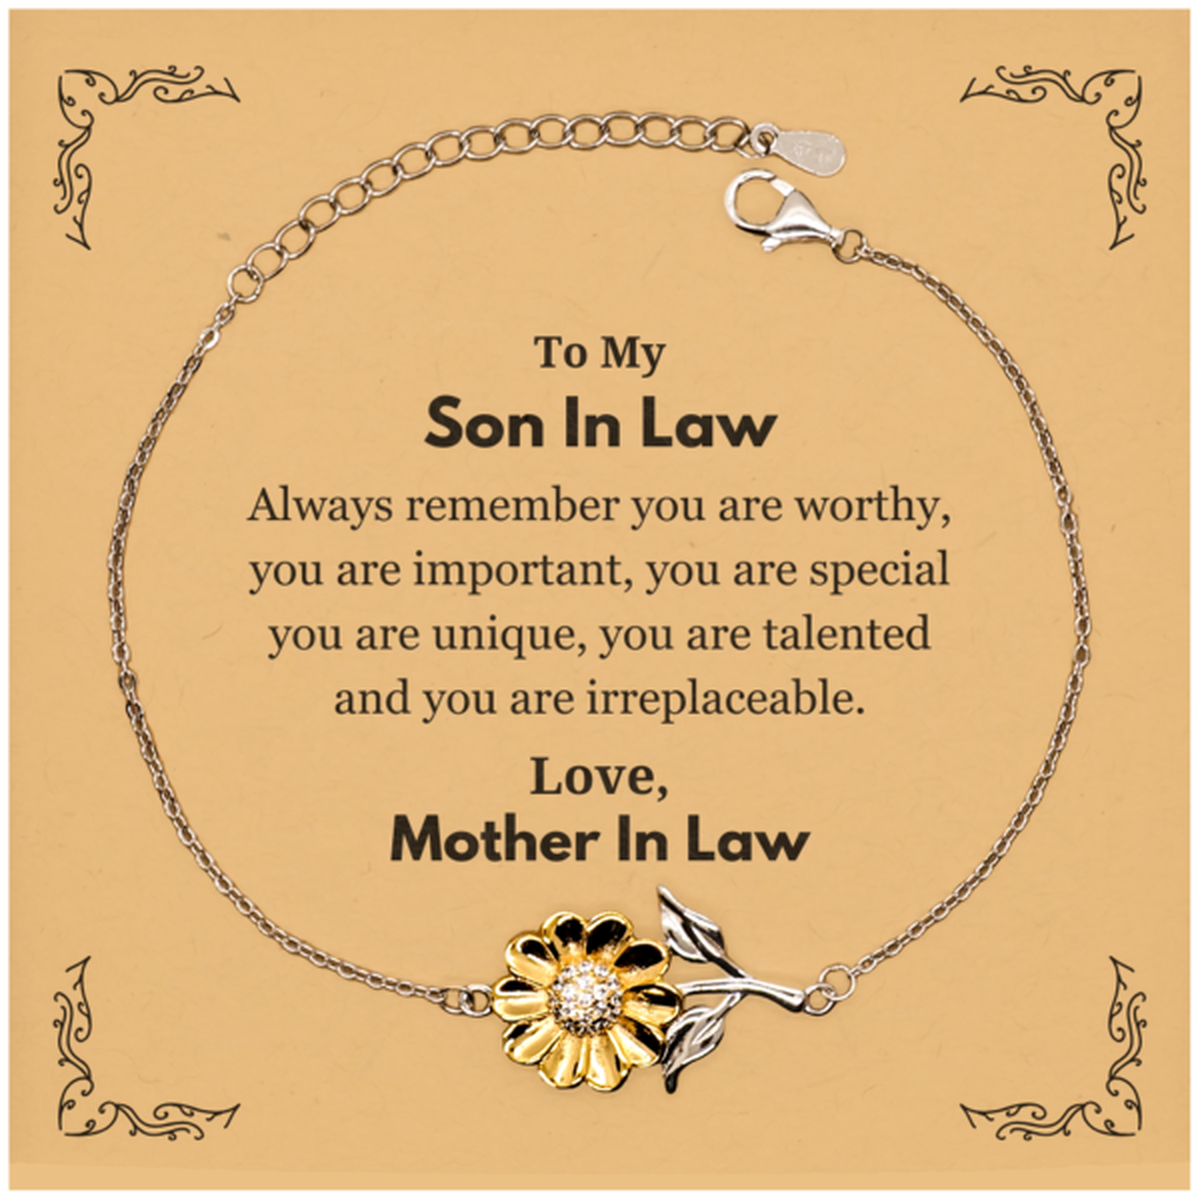 Son In Law Birthday Gifts from Mother In Law, Inspirational Sunflower Bracelet for Son In Law Christmas Graduation Gifts for Son In Law Always remember you are worthy, you are important. Love, Mother In Law